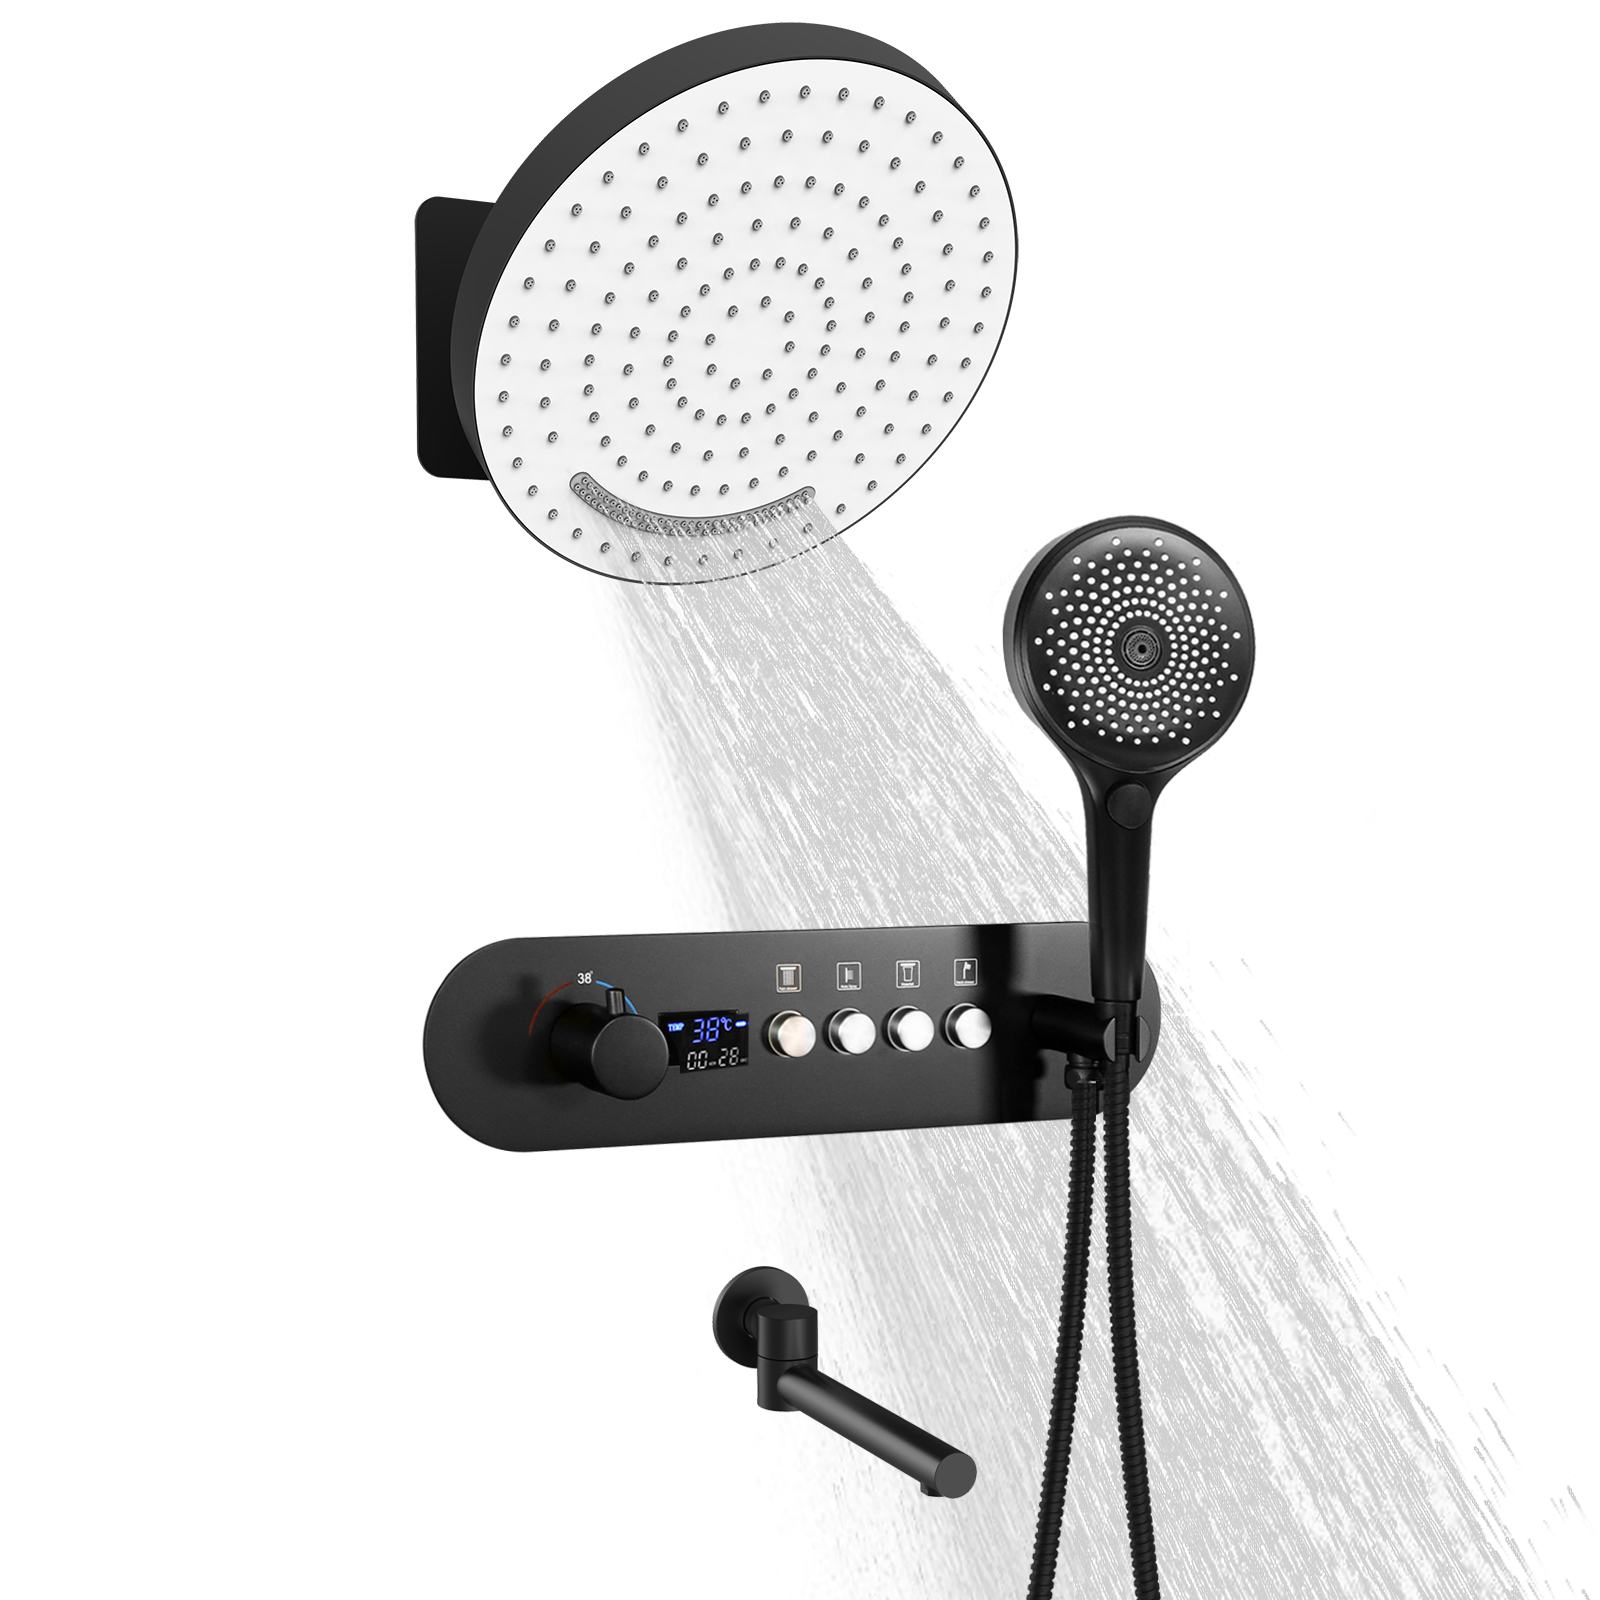 Wall Rainfall, Waterfall Shower System And Water Exit Constant Temperature Shower Mixer